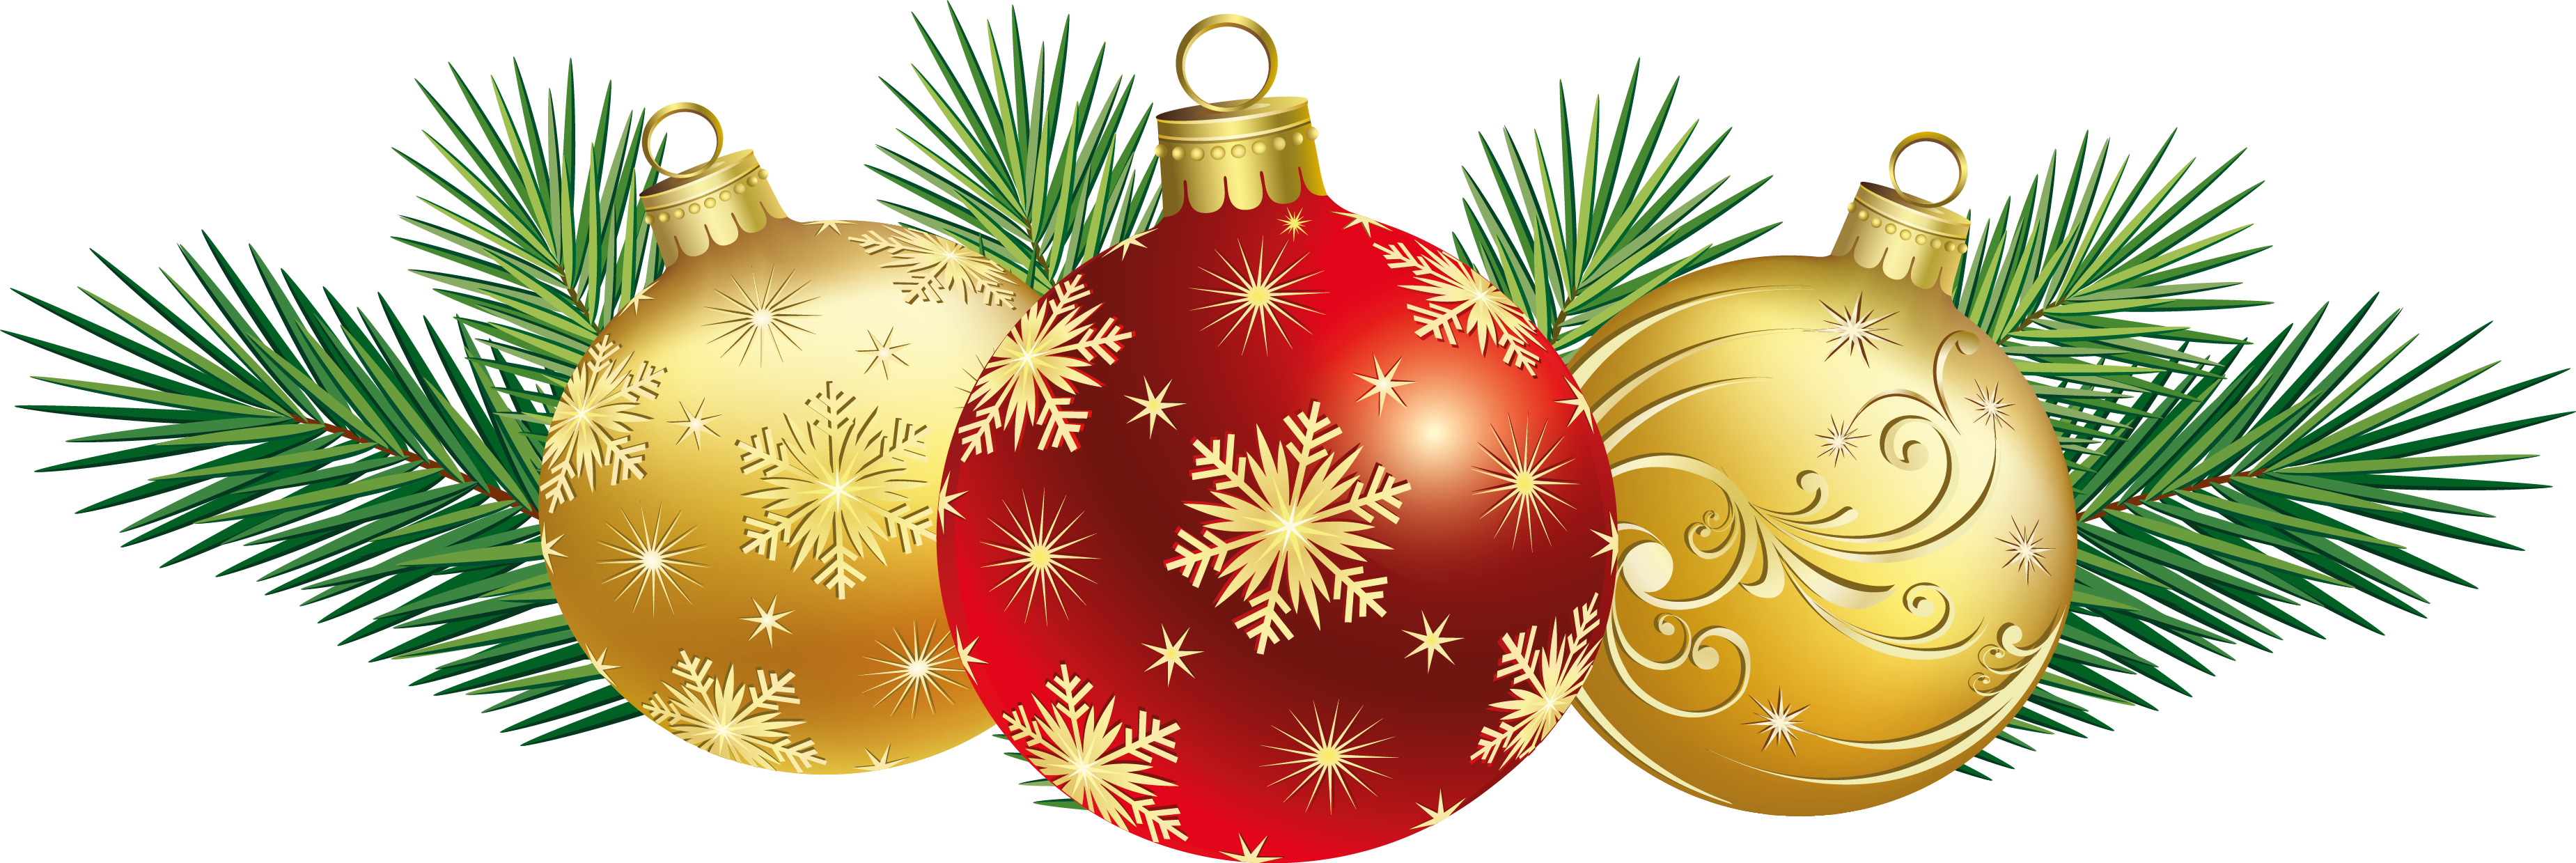 Decorations Picture PNG Image